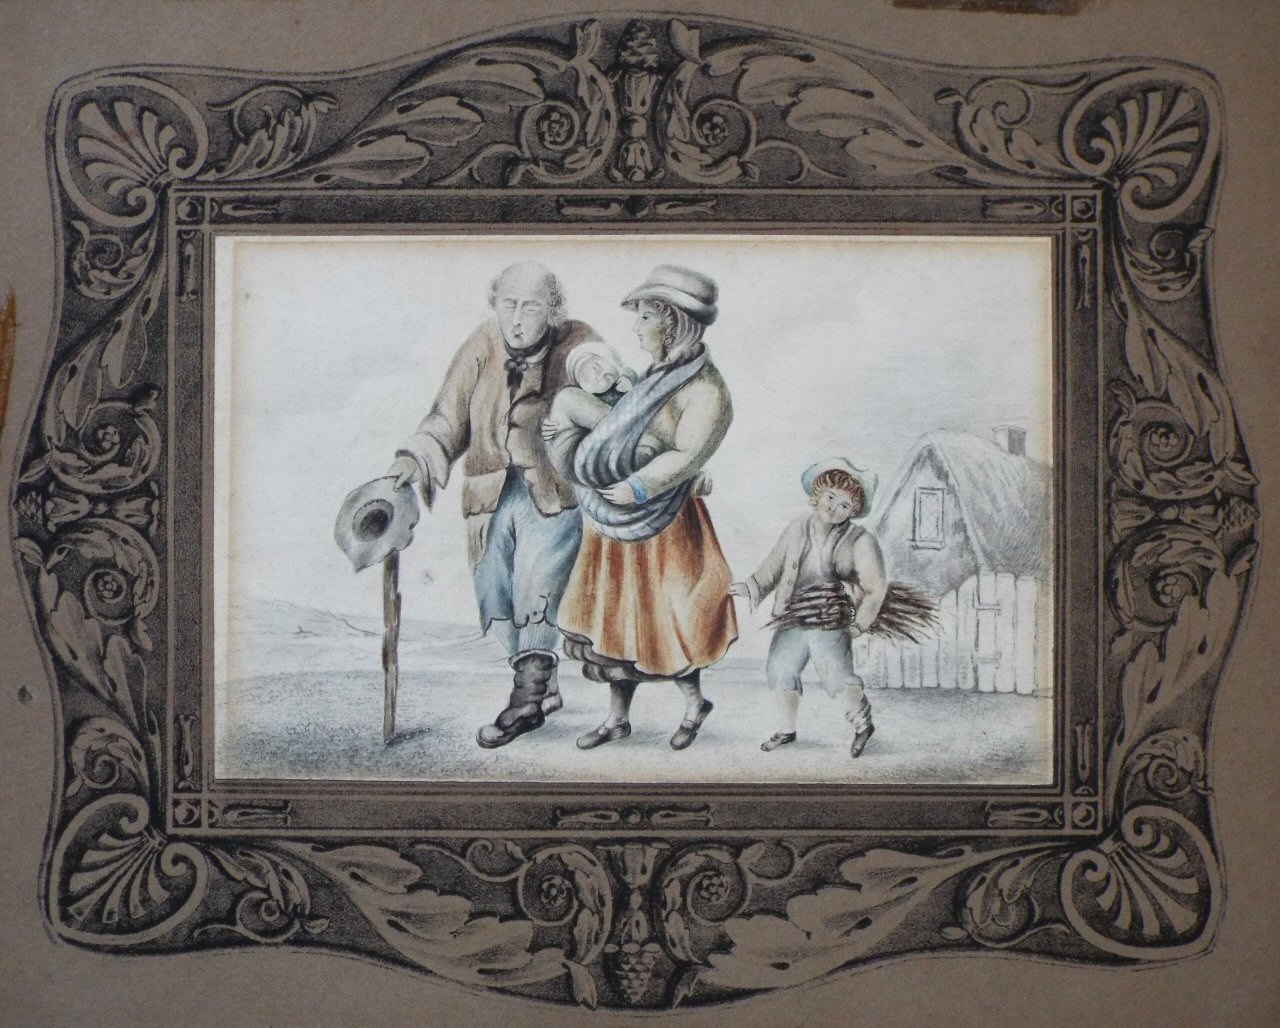 Pencil & watercolour - A peasant family group.